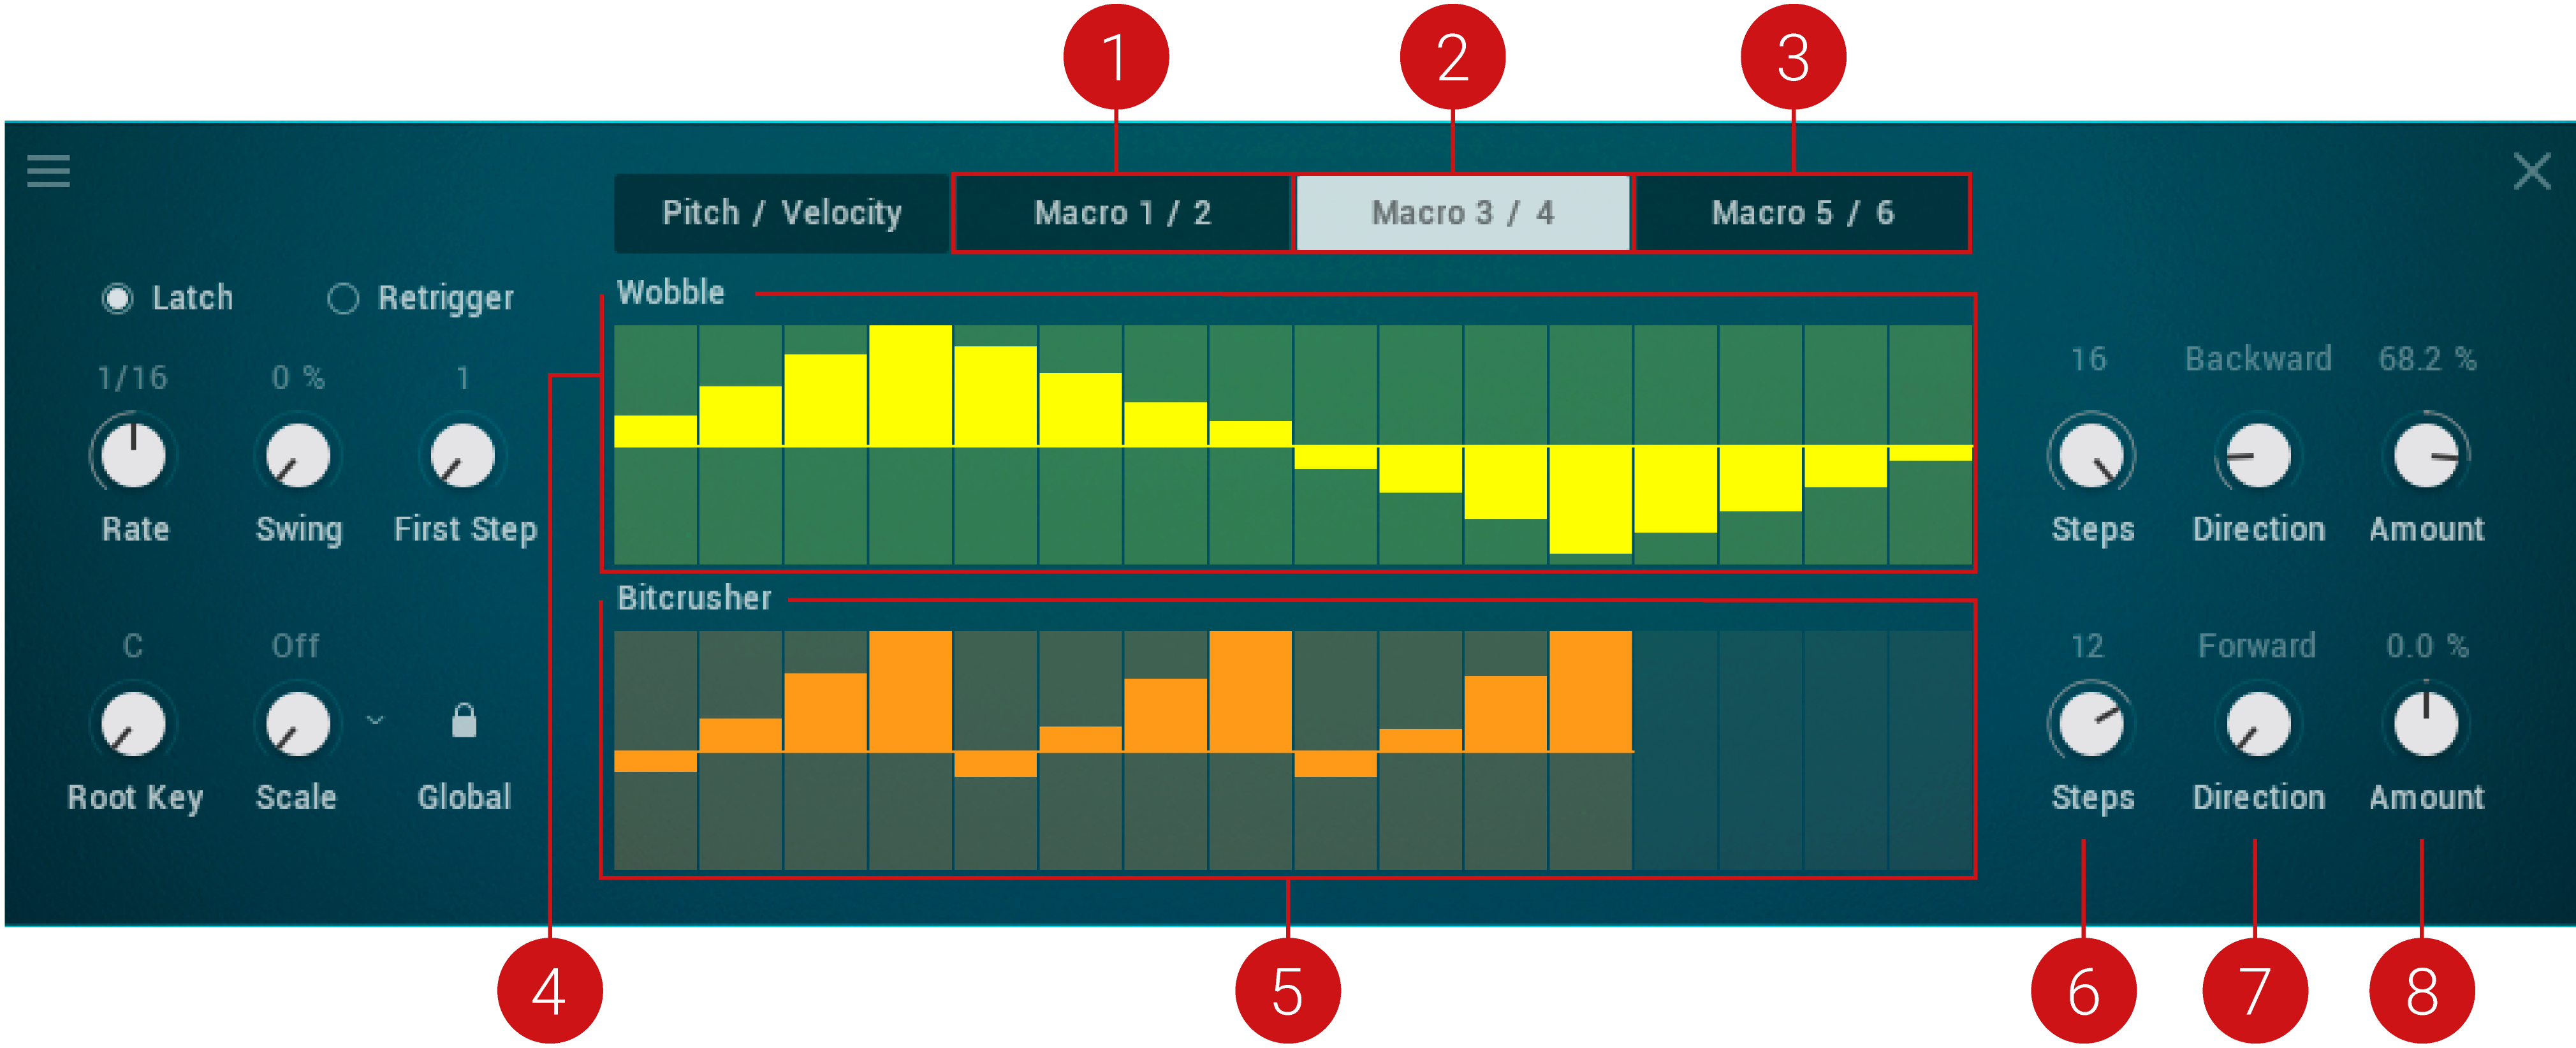 HybKeys_Sequencer_Macros_Overview.png